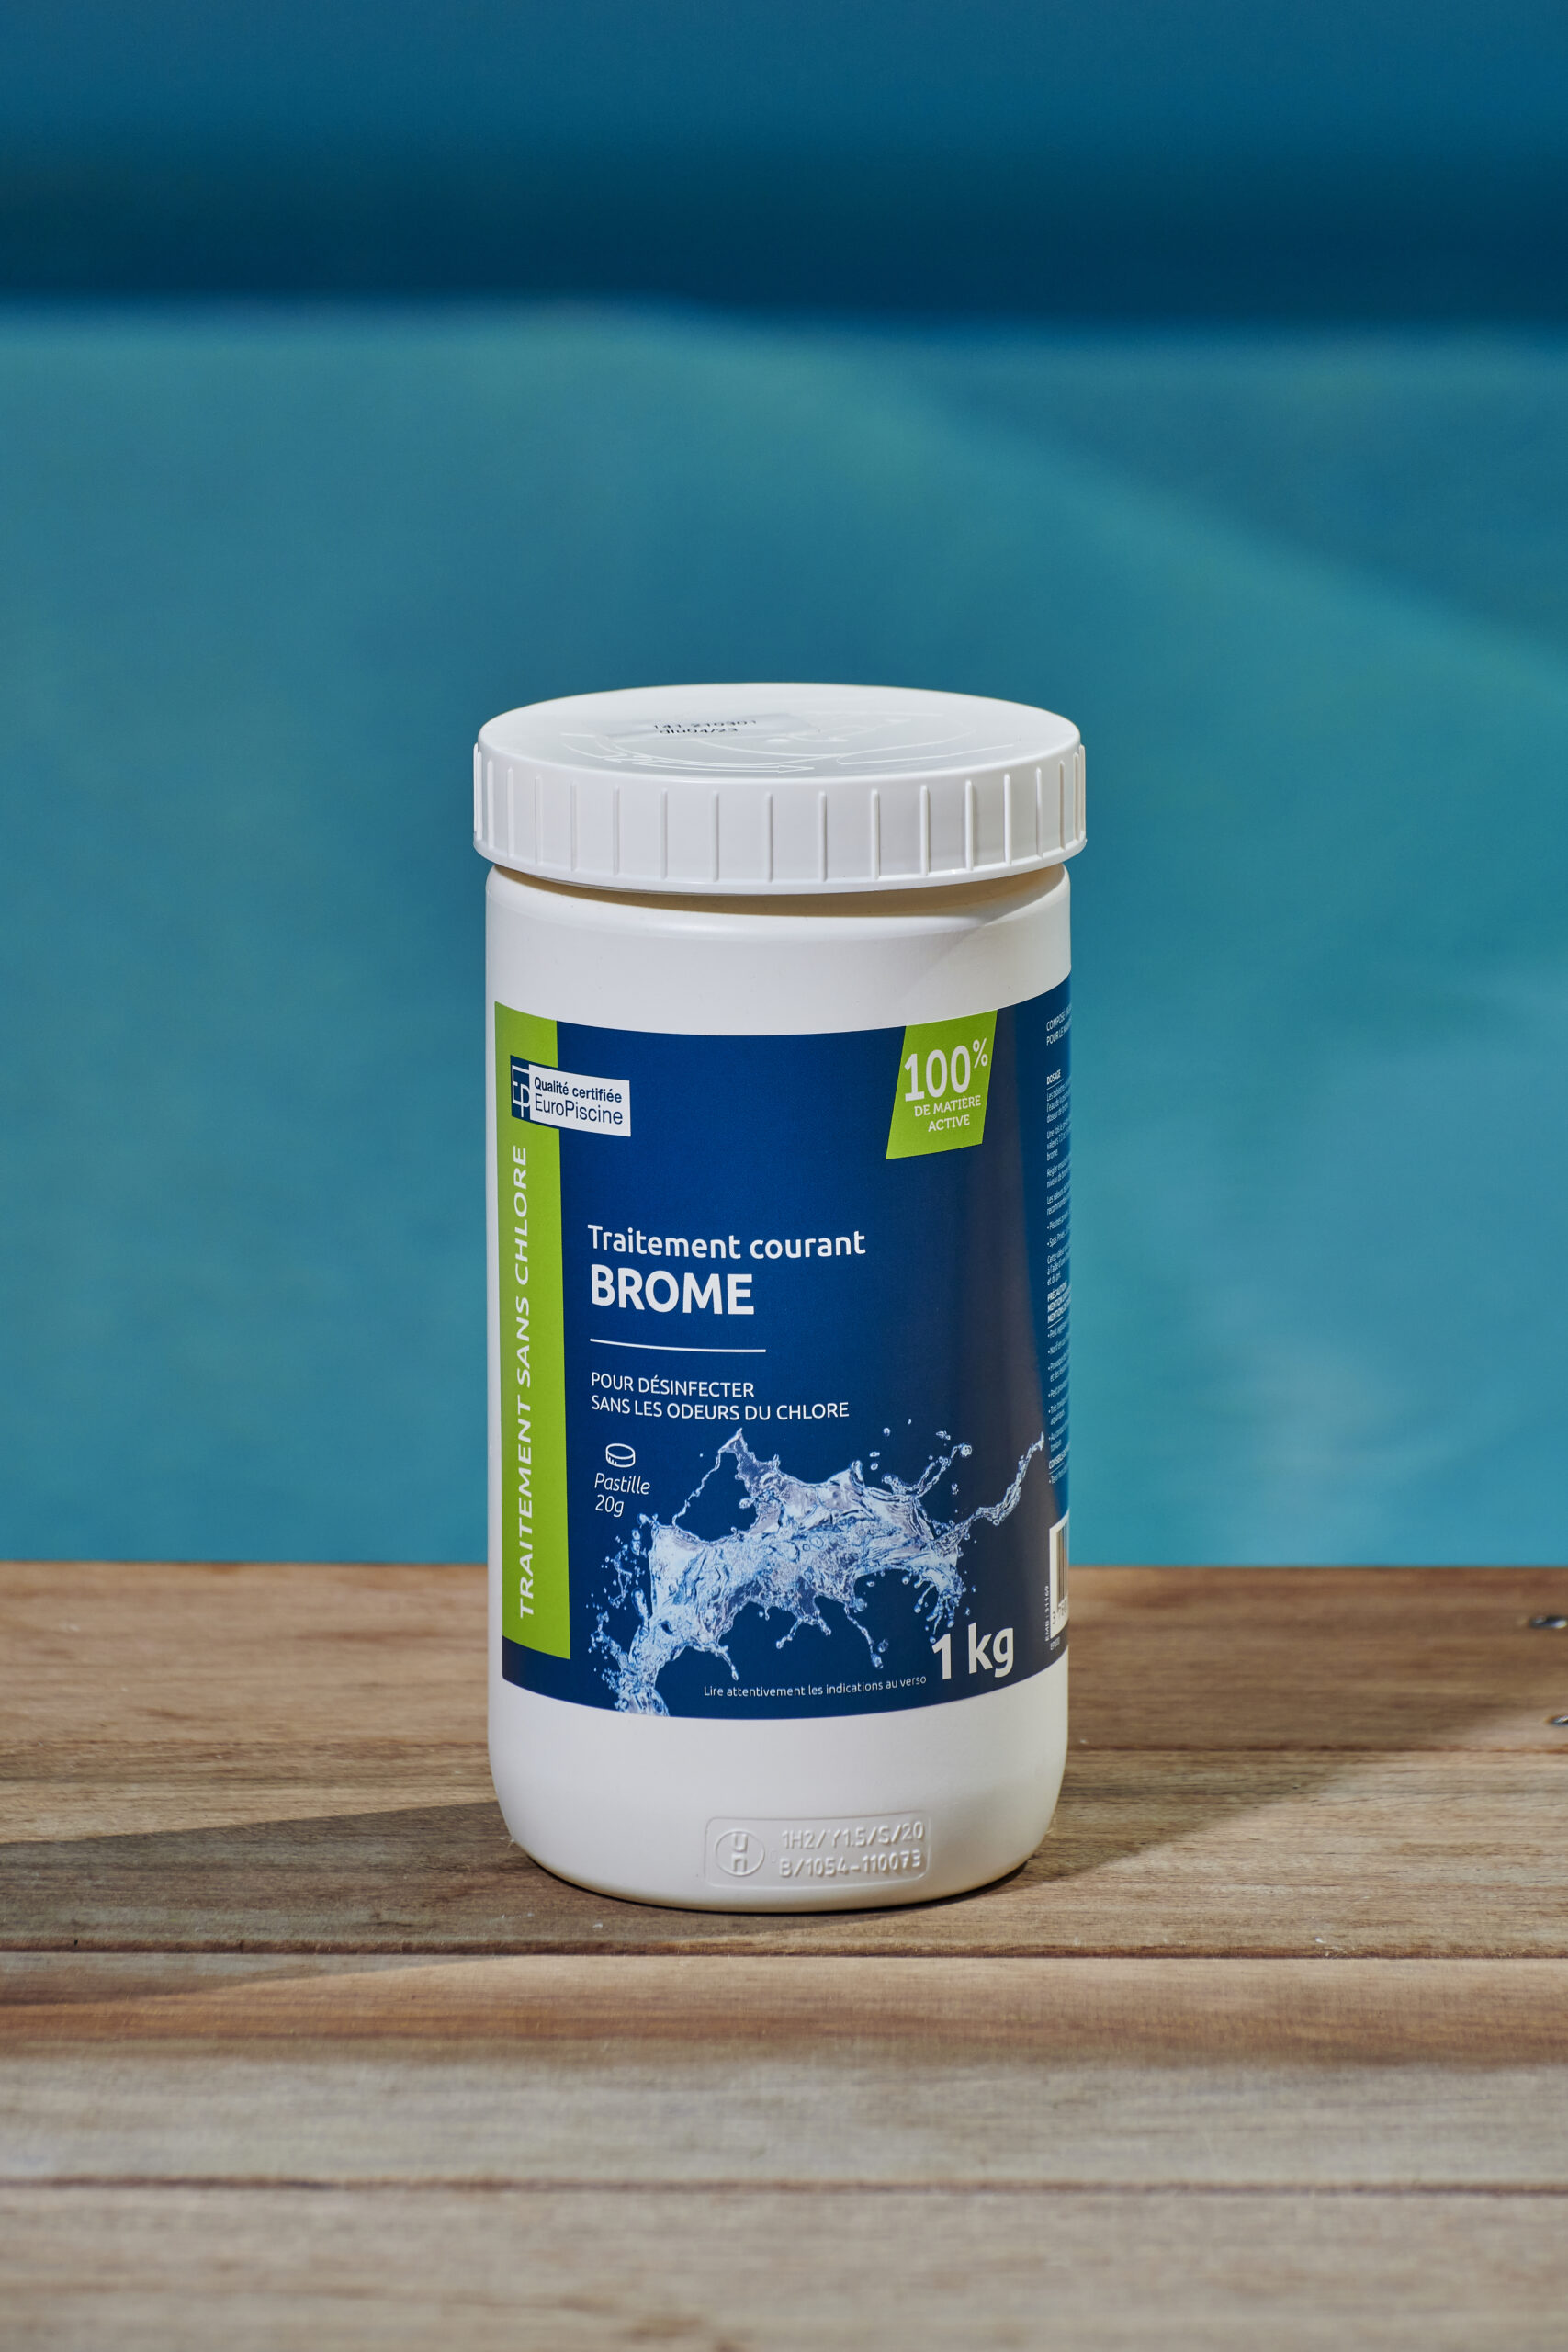 Brome SPA 1Kg Piscines Excellence